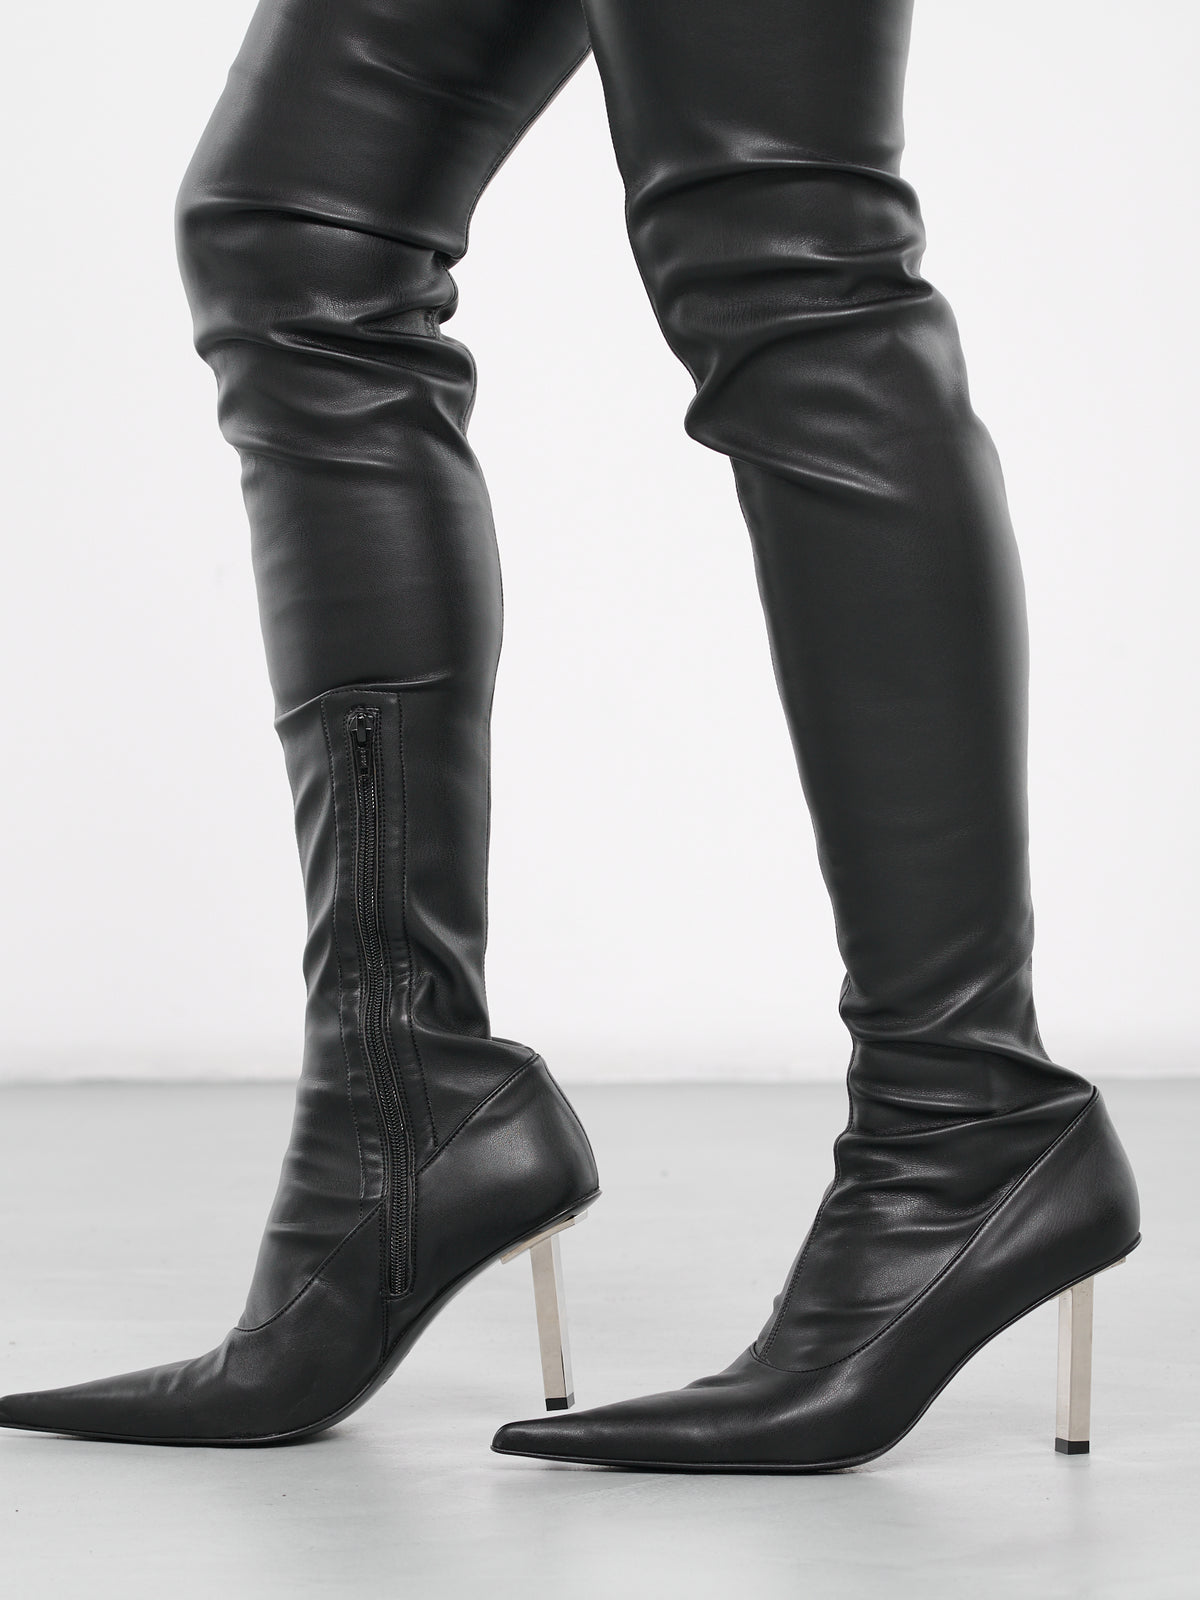 Thigh High Leather Boots (BT10-1-BLACK)